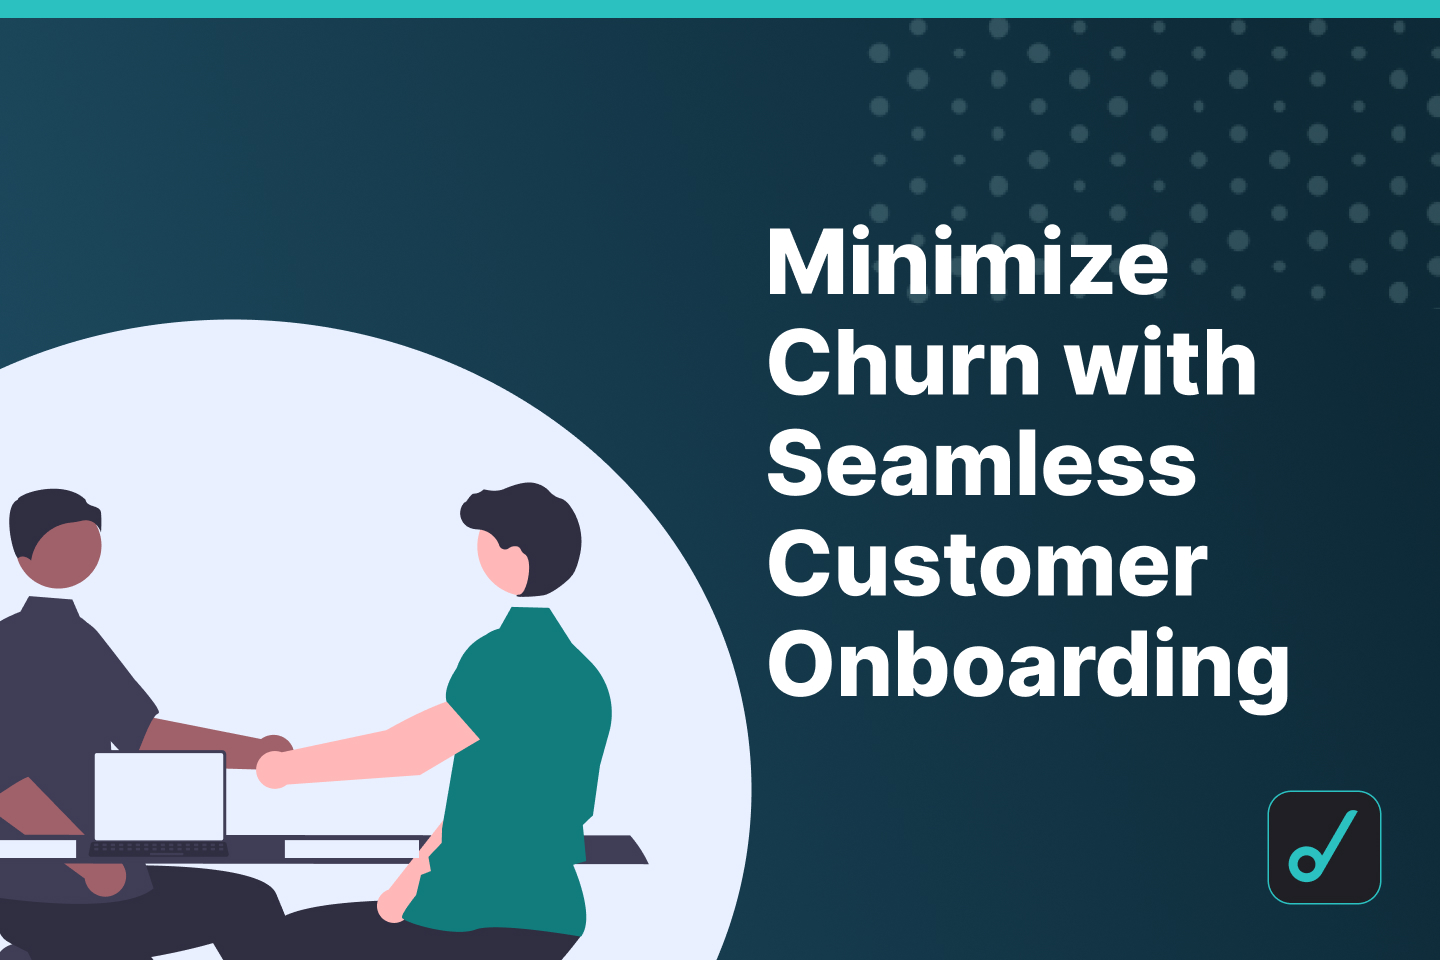 Perfecting the Onboarding Experience to Minimize Churn